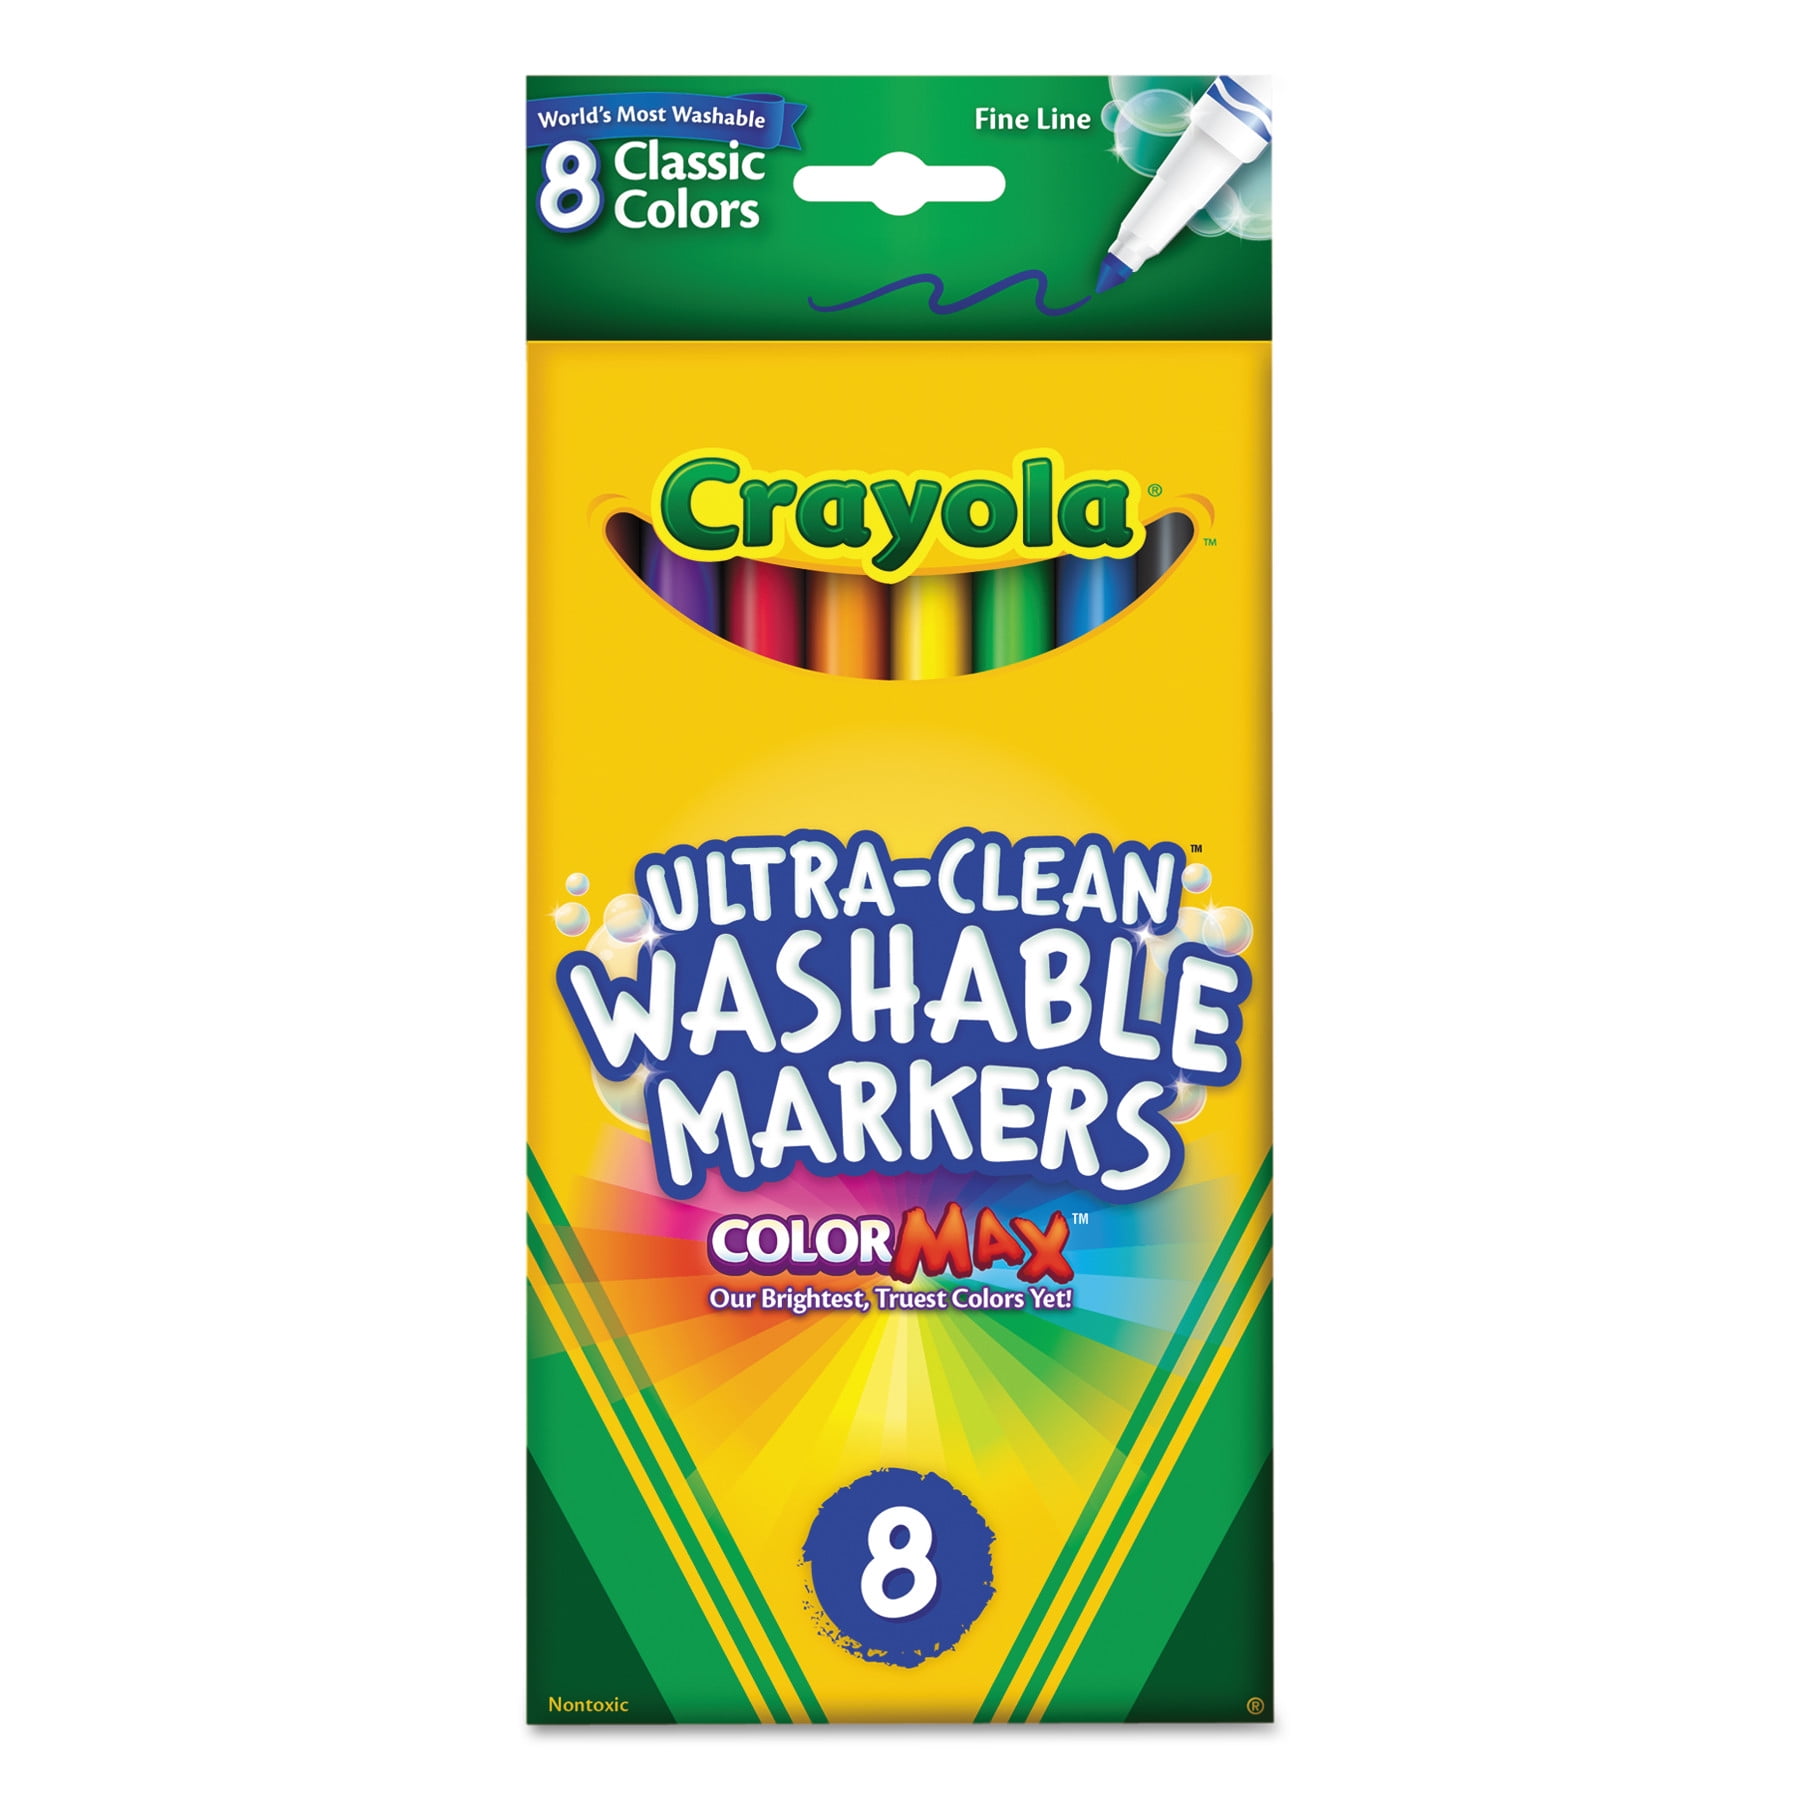  Crayola Broad Line Markers (12 Count), Washable